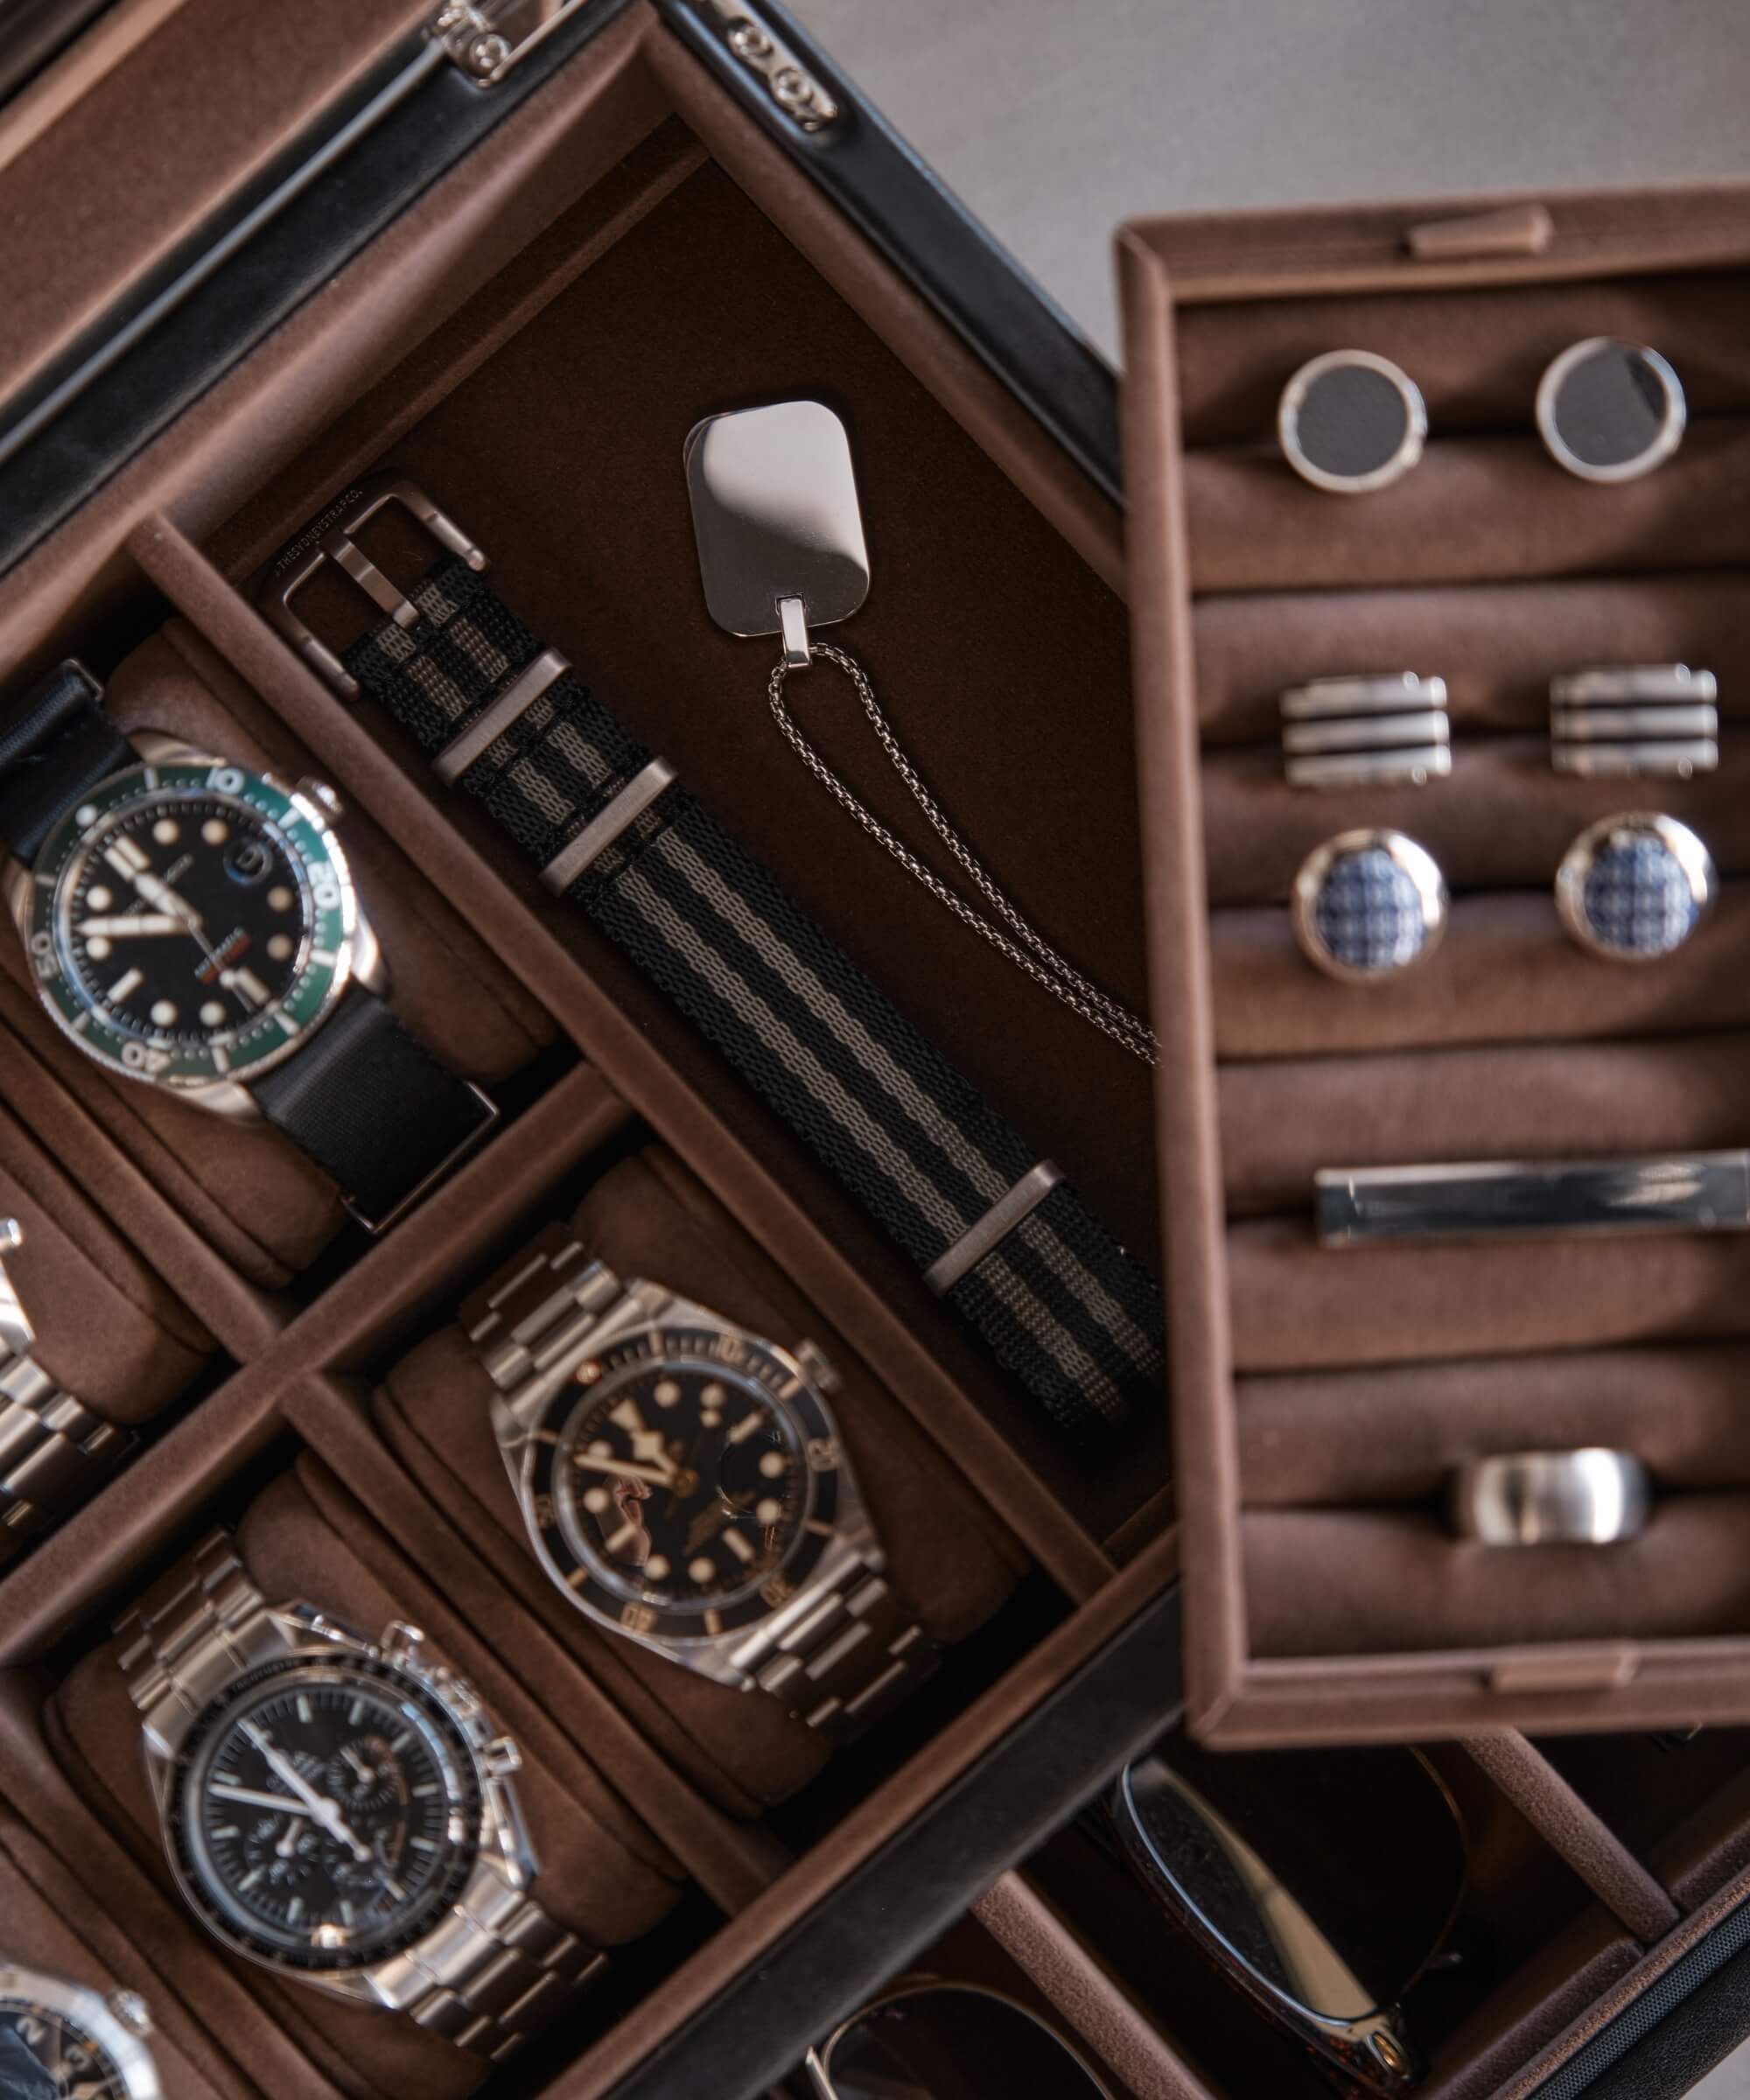 A TAWBURY Bayswater 6 Watch Jewellery Box - Black filled with timepieces, cufflinks, and other lifestyle accessories.